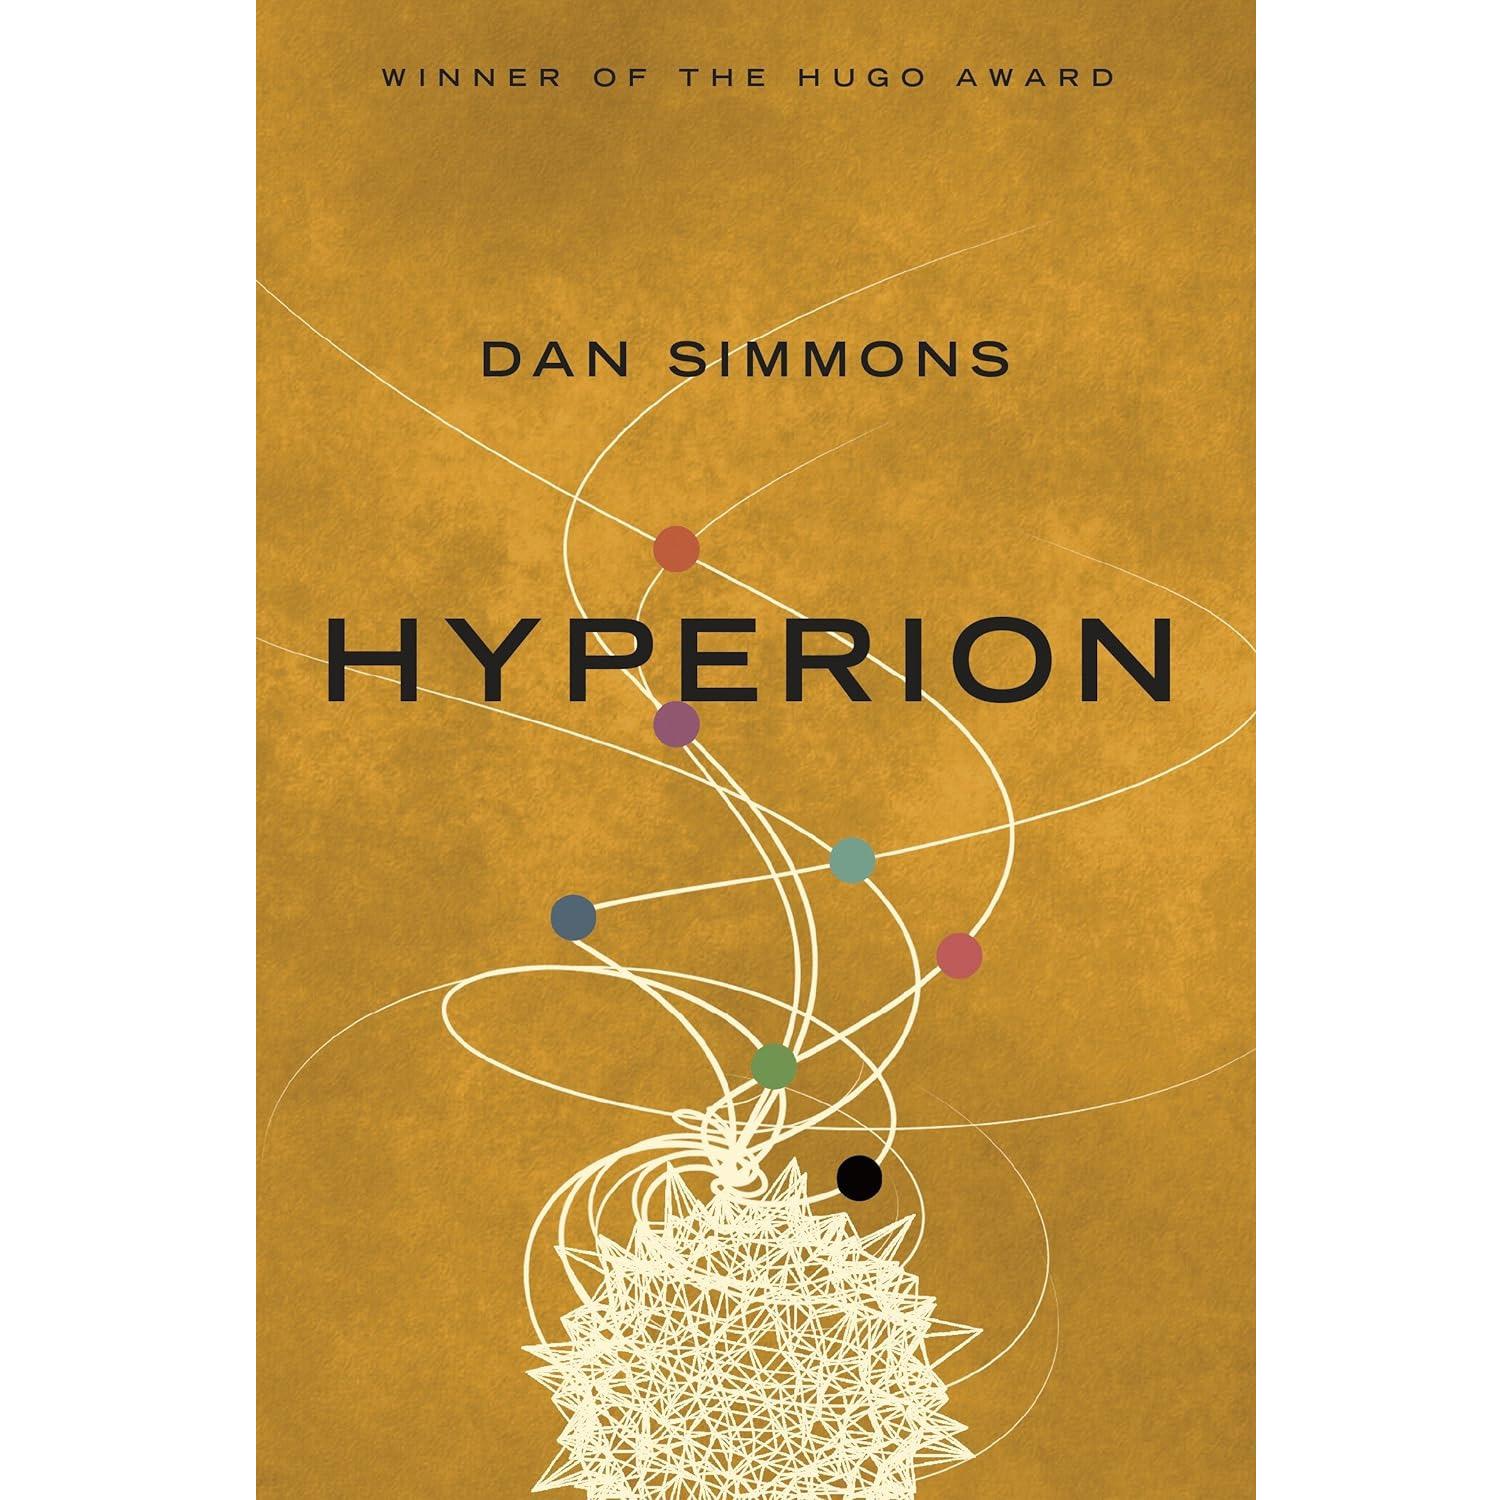 Hyperion by Dan Simmons eBook for $1.99